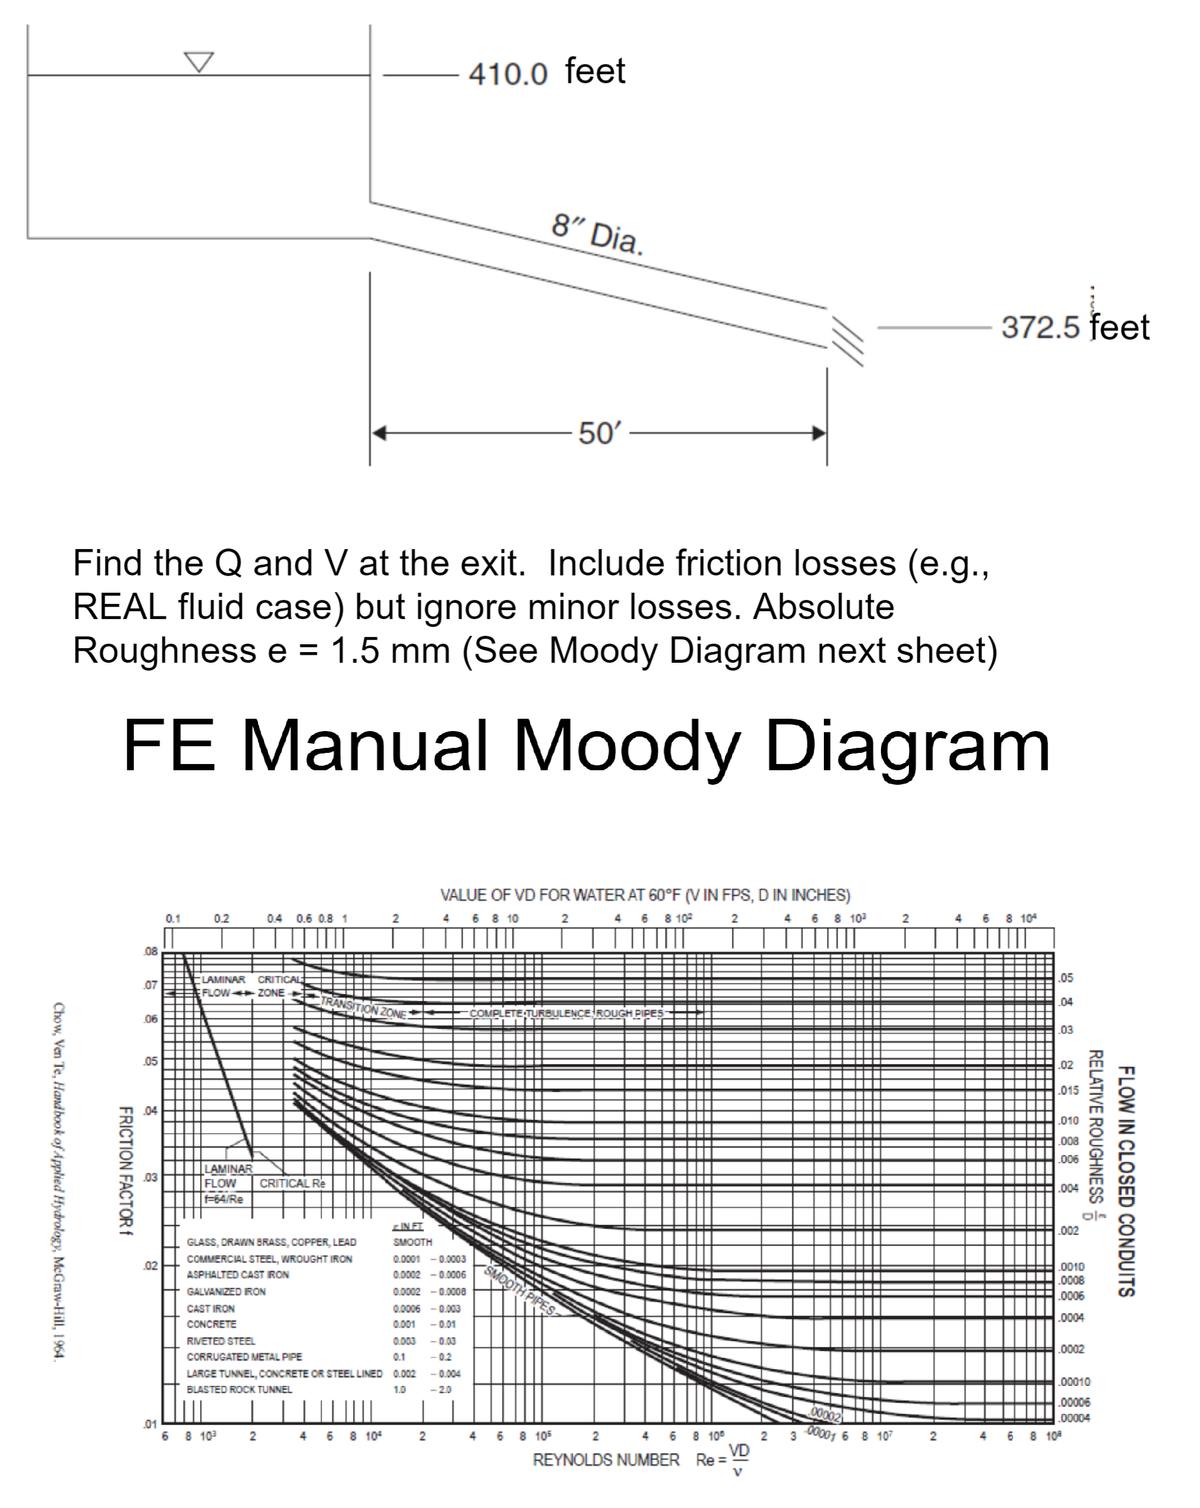 Chow, Ven Te, Handbook of Applied Hydrology, McGraw-Hill, 1964.
FRICTION FACTOR f
08
07
Find the Q and V at the exit. Include friction losses (e.g.,
REAL fluid case) but ignore minor losses. Absolute
Roughness e = 1.5 mm (See Moody Diagram next sheet)
FE Manual Moody Diagram
06
.05
.04
03
02
01
0.1
0.2
CLAMINAR CRITICAL
FLOW ZONE
LAMINAR
FLOW
f-64/Re
0.4 0.6 0.8 1
6 8 10³
2
TRANSITION ZONE
CRITICAL Re
2
GLASS, DRAWN BRASS, COPPER, LEAD
COMMERCIAL STEEL, WROUGHT IRON
ASPHALTED CAST IRON
GALVANIZED IRON
CAST IRON
CONCRETE
RIVETED STEEL
-0.03
CORRUGATED METAL PIPE
-0.2
LARGE TUNNEL, CONCRETE OR STEEL LINED 0.002 -0.004
BLASTED ROCK TUNNEL
1.0
<-2.0
4 6
8 10
ZIN FI
SMOOTH
410.0 feet
0.003
0.1
0.0001 -0.0003
0.0002 -0.0006
0.0002 -0.0008
0.0006 -0.003
0.001
-0.01
2
8" Dia.
VALUE OF VD FOR WATER AT 60°F (V IN FPS, DIN INCHES)
4 6 8 10
2 4 6 8 10²
2
4 6 8 10³
50'
COMPLETE TURBULENCE ROUGH PIPES
SMOOTH PIPES
4 6 8 105
2 4 6 8 10⁰
VD
REYNOLDS NUMBER Re=
V
2
3
00002
00001 6 8 10
372.5 feet
2
4 6 8 104
|||||||
.05
04
03
.02
.015
010
008
.006
.004
.002
.0010
.0008
.0006
.0004
.0002
RELATIVE
FLOW IN CLOSED CONDUITS
2 4 6 8 108
ROUGHNESS
00010
.00006
.00004